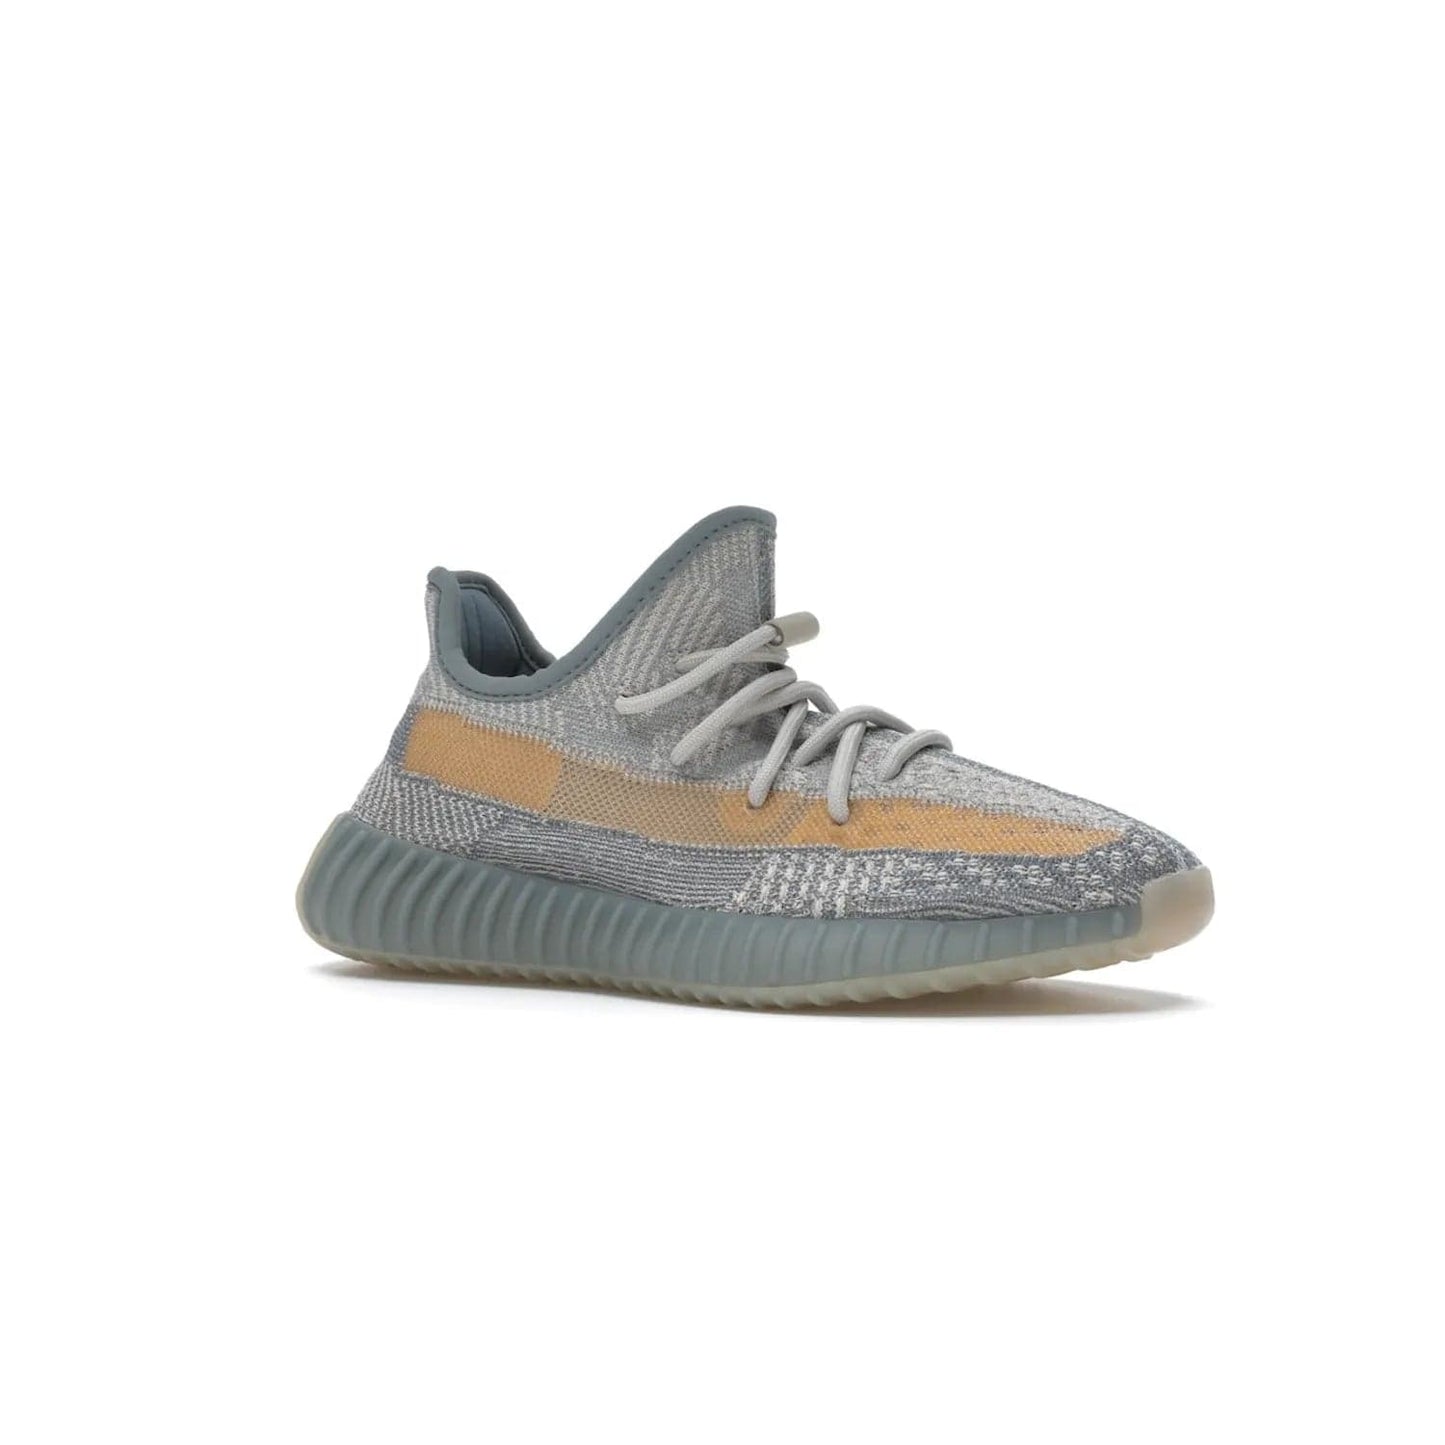 adidas Yeezy Boost 350 V2 Israfil - Image 4 - Only at www.BallersClubKickz.com - The adidas Yeezy Boost 350 V2 Israfil provides a unique style with a triple colorway and multi-colored threads. Featuring BOOST cushioning in a translucent midsole, this must-have sneaker drops in August 2020.